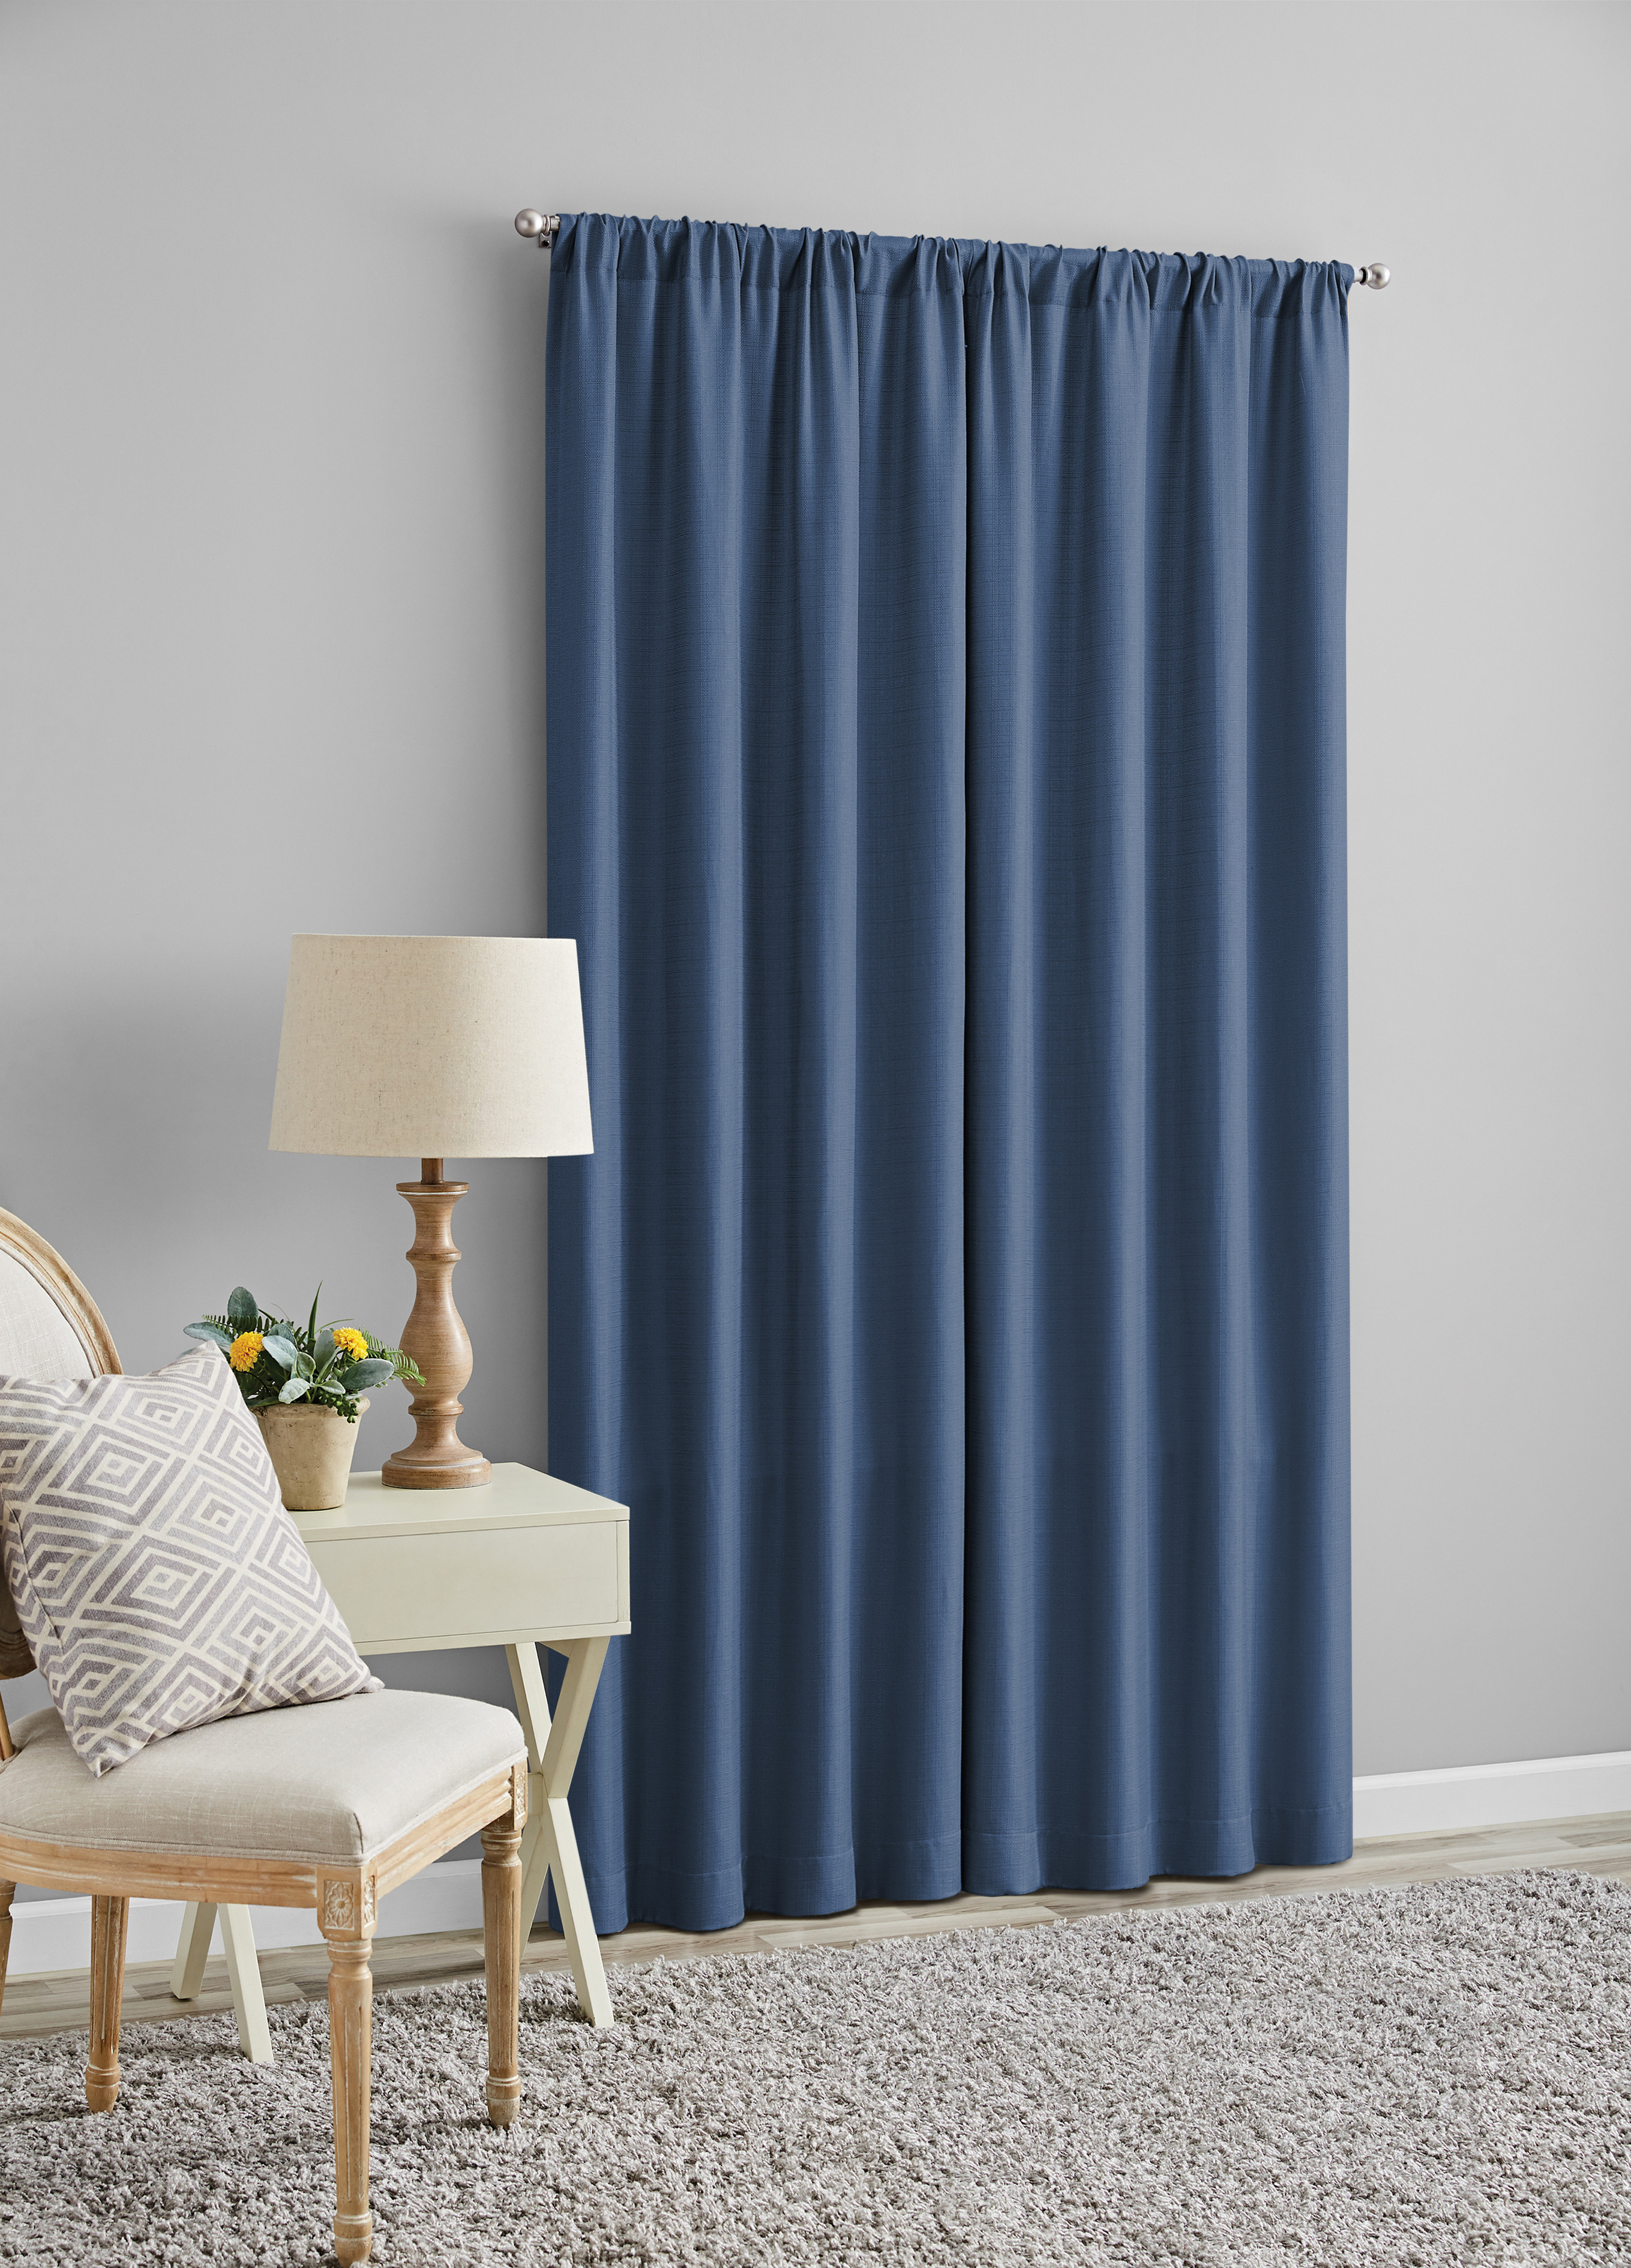 Mainstays Southport Solid Color Light Filtering Rod Pocket Curtain Panel Pair, Set of 2, Blue, 40 x 84 - image 2 of 5